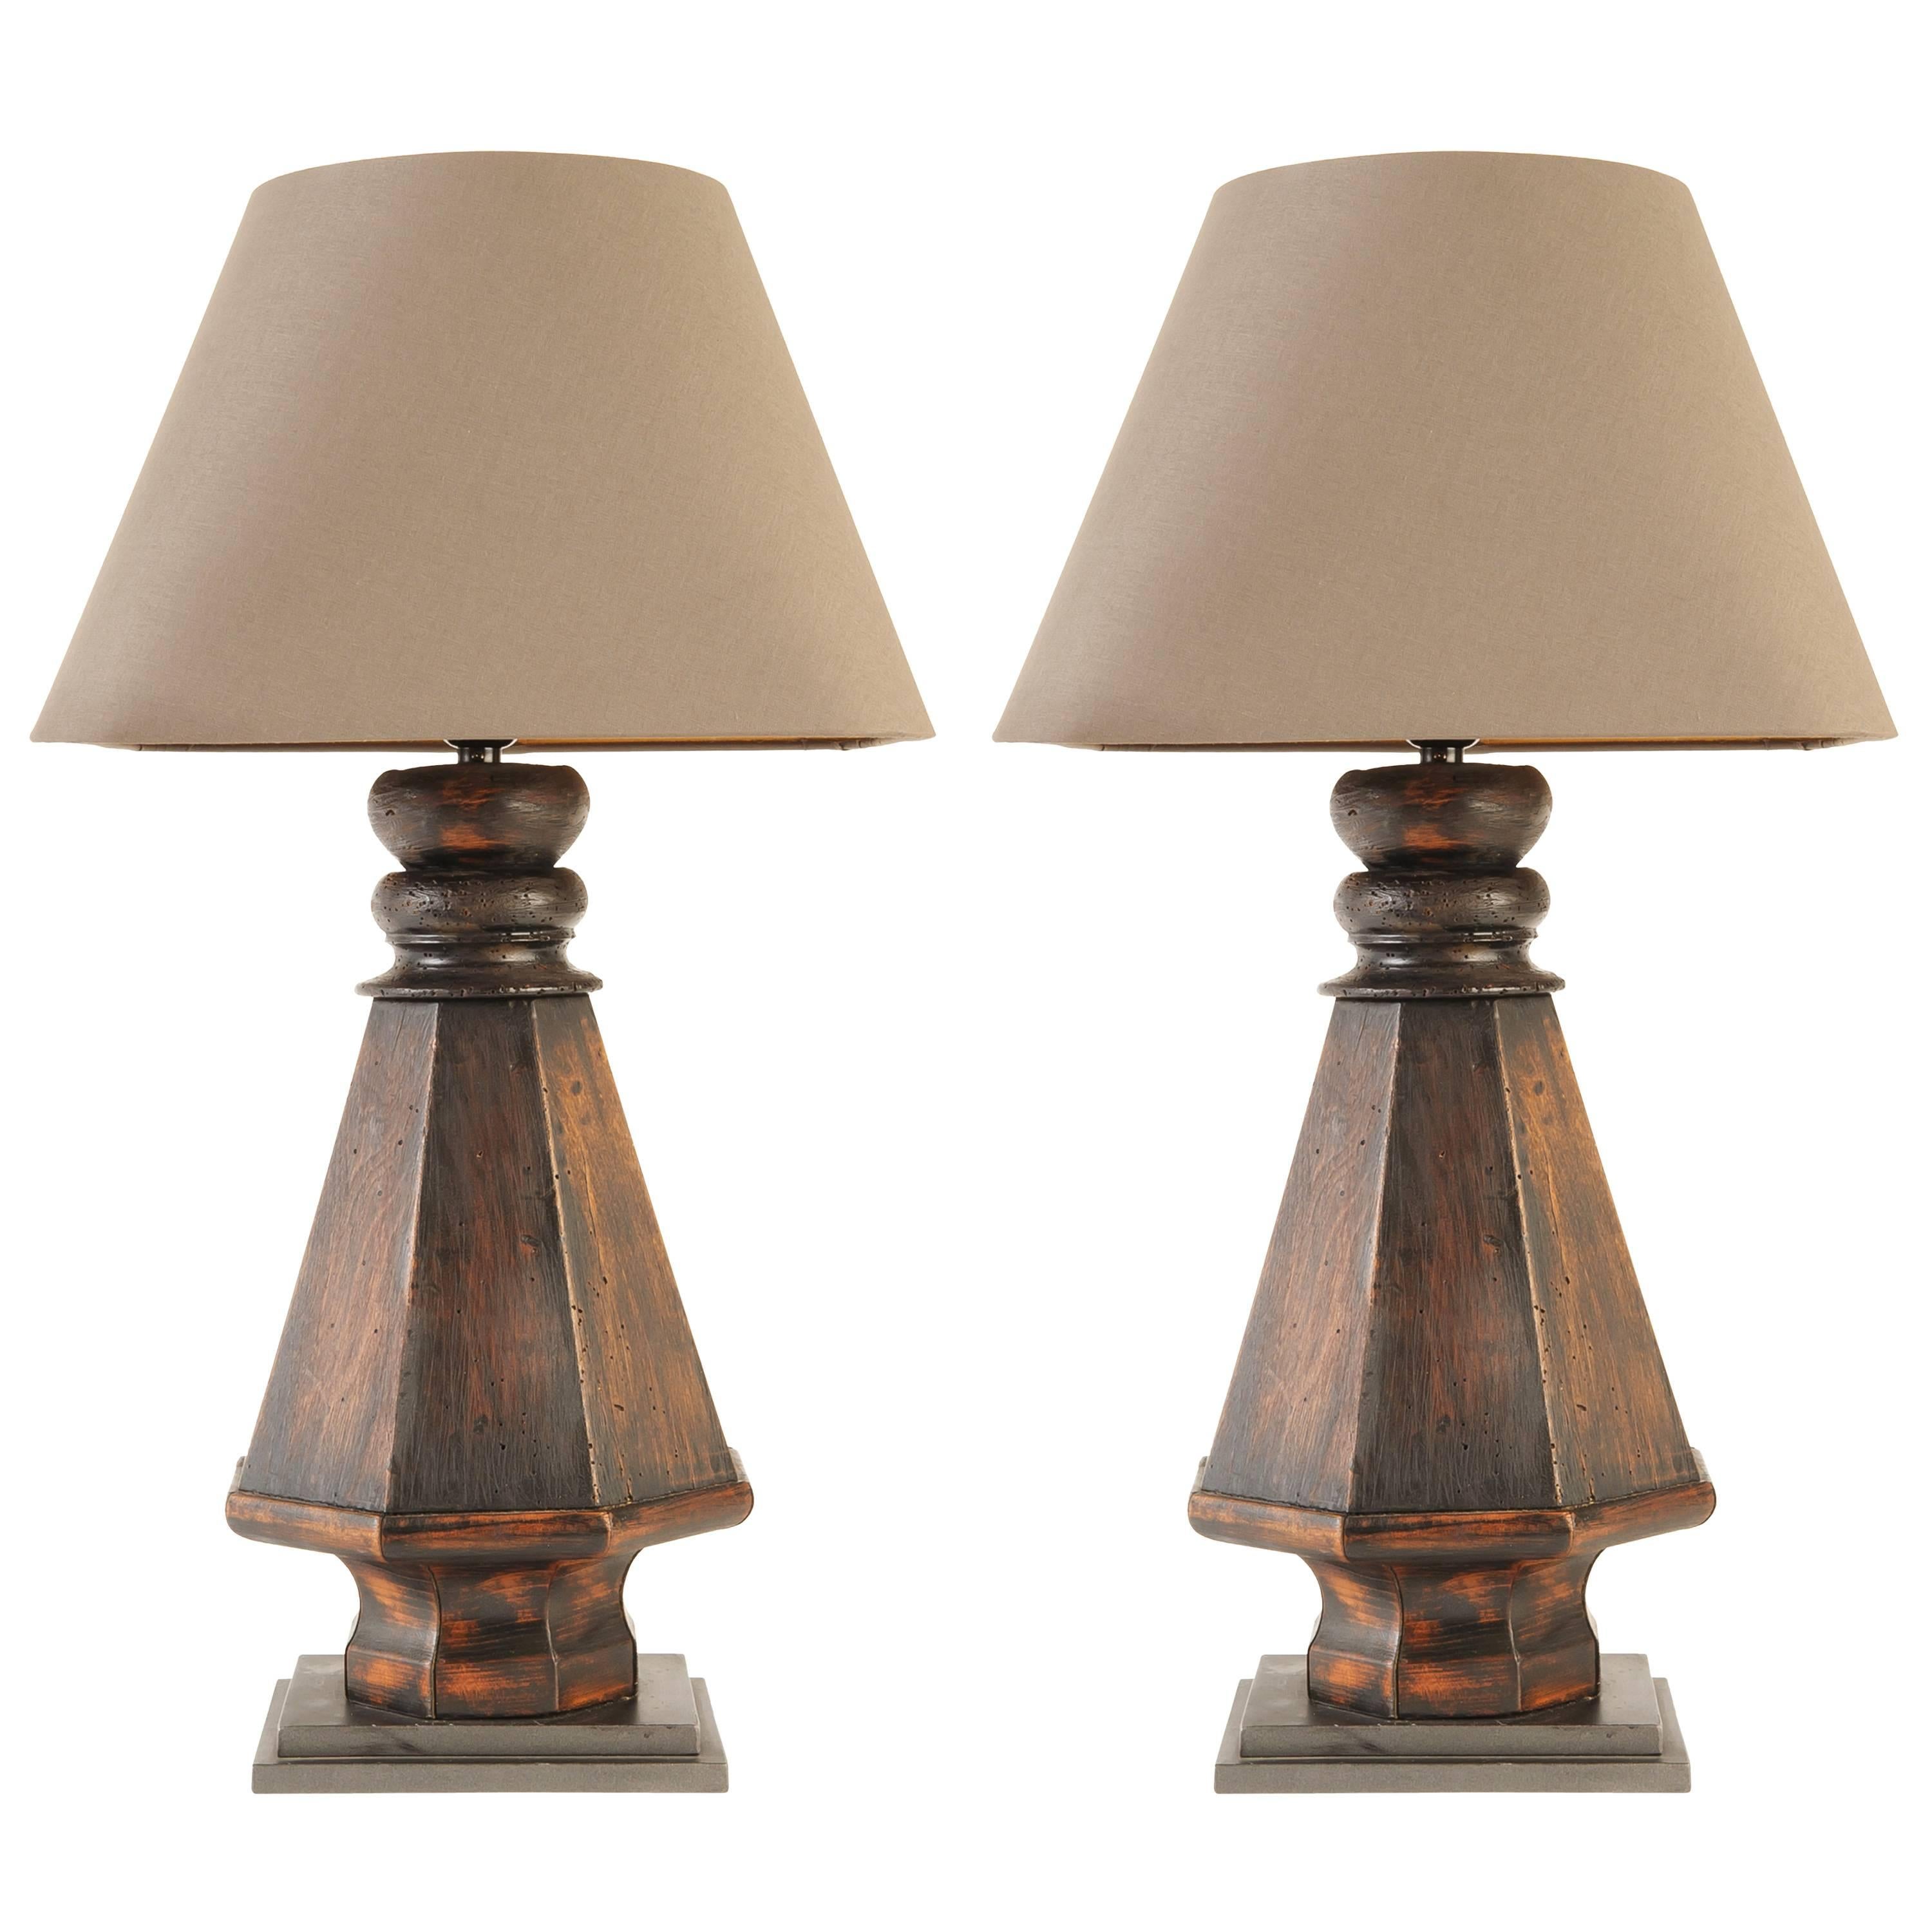 Pair of Wood Lamps, Billiard Table Legs, with Custom Linen Shade